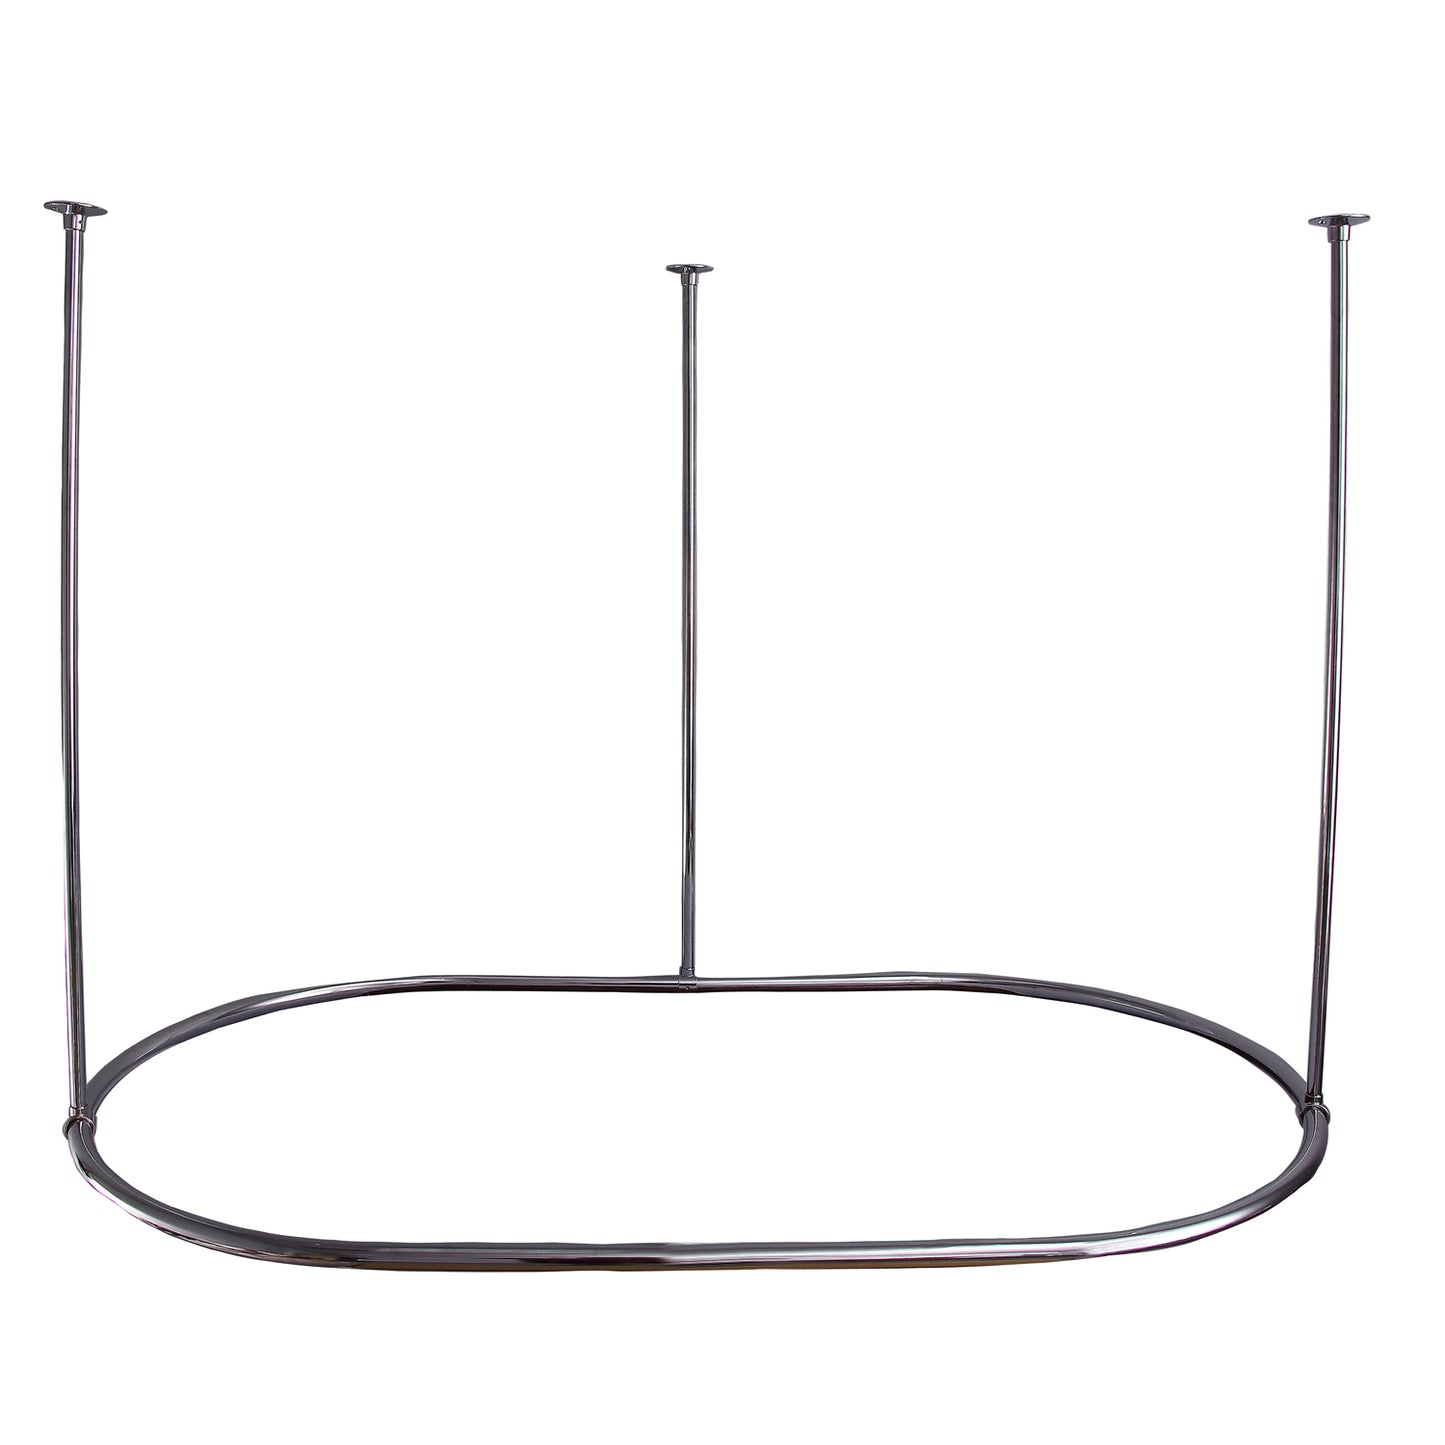 54" x 36" Oval Shower Curtain Ring in Chrome